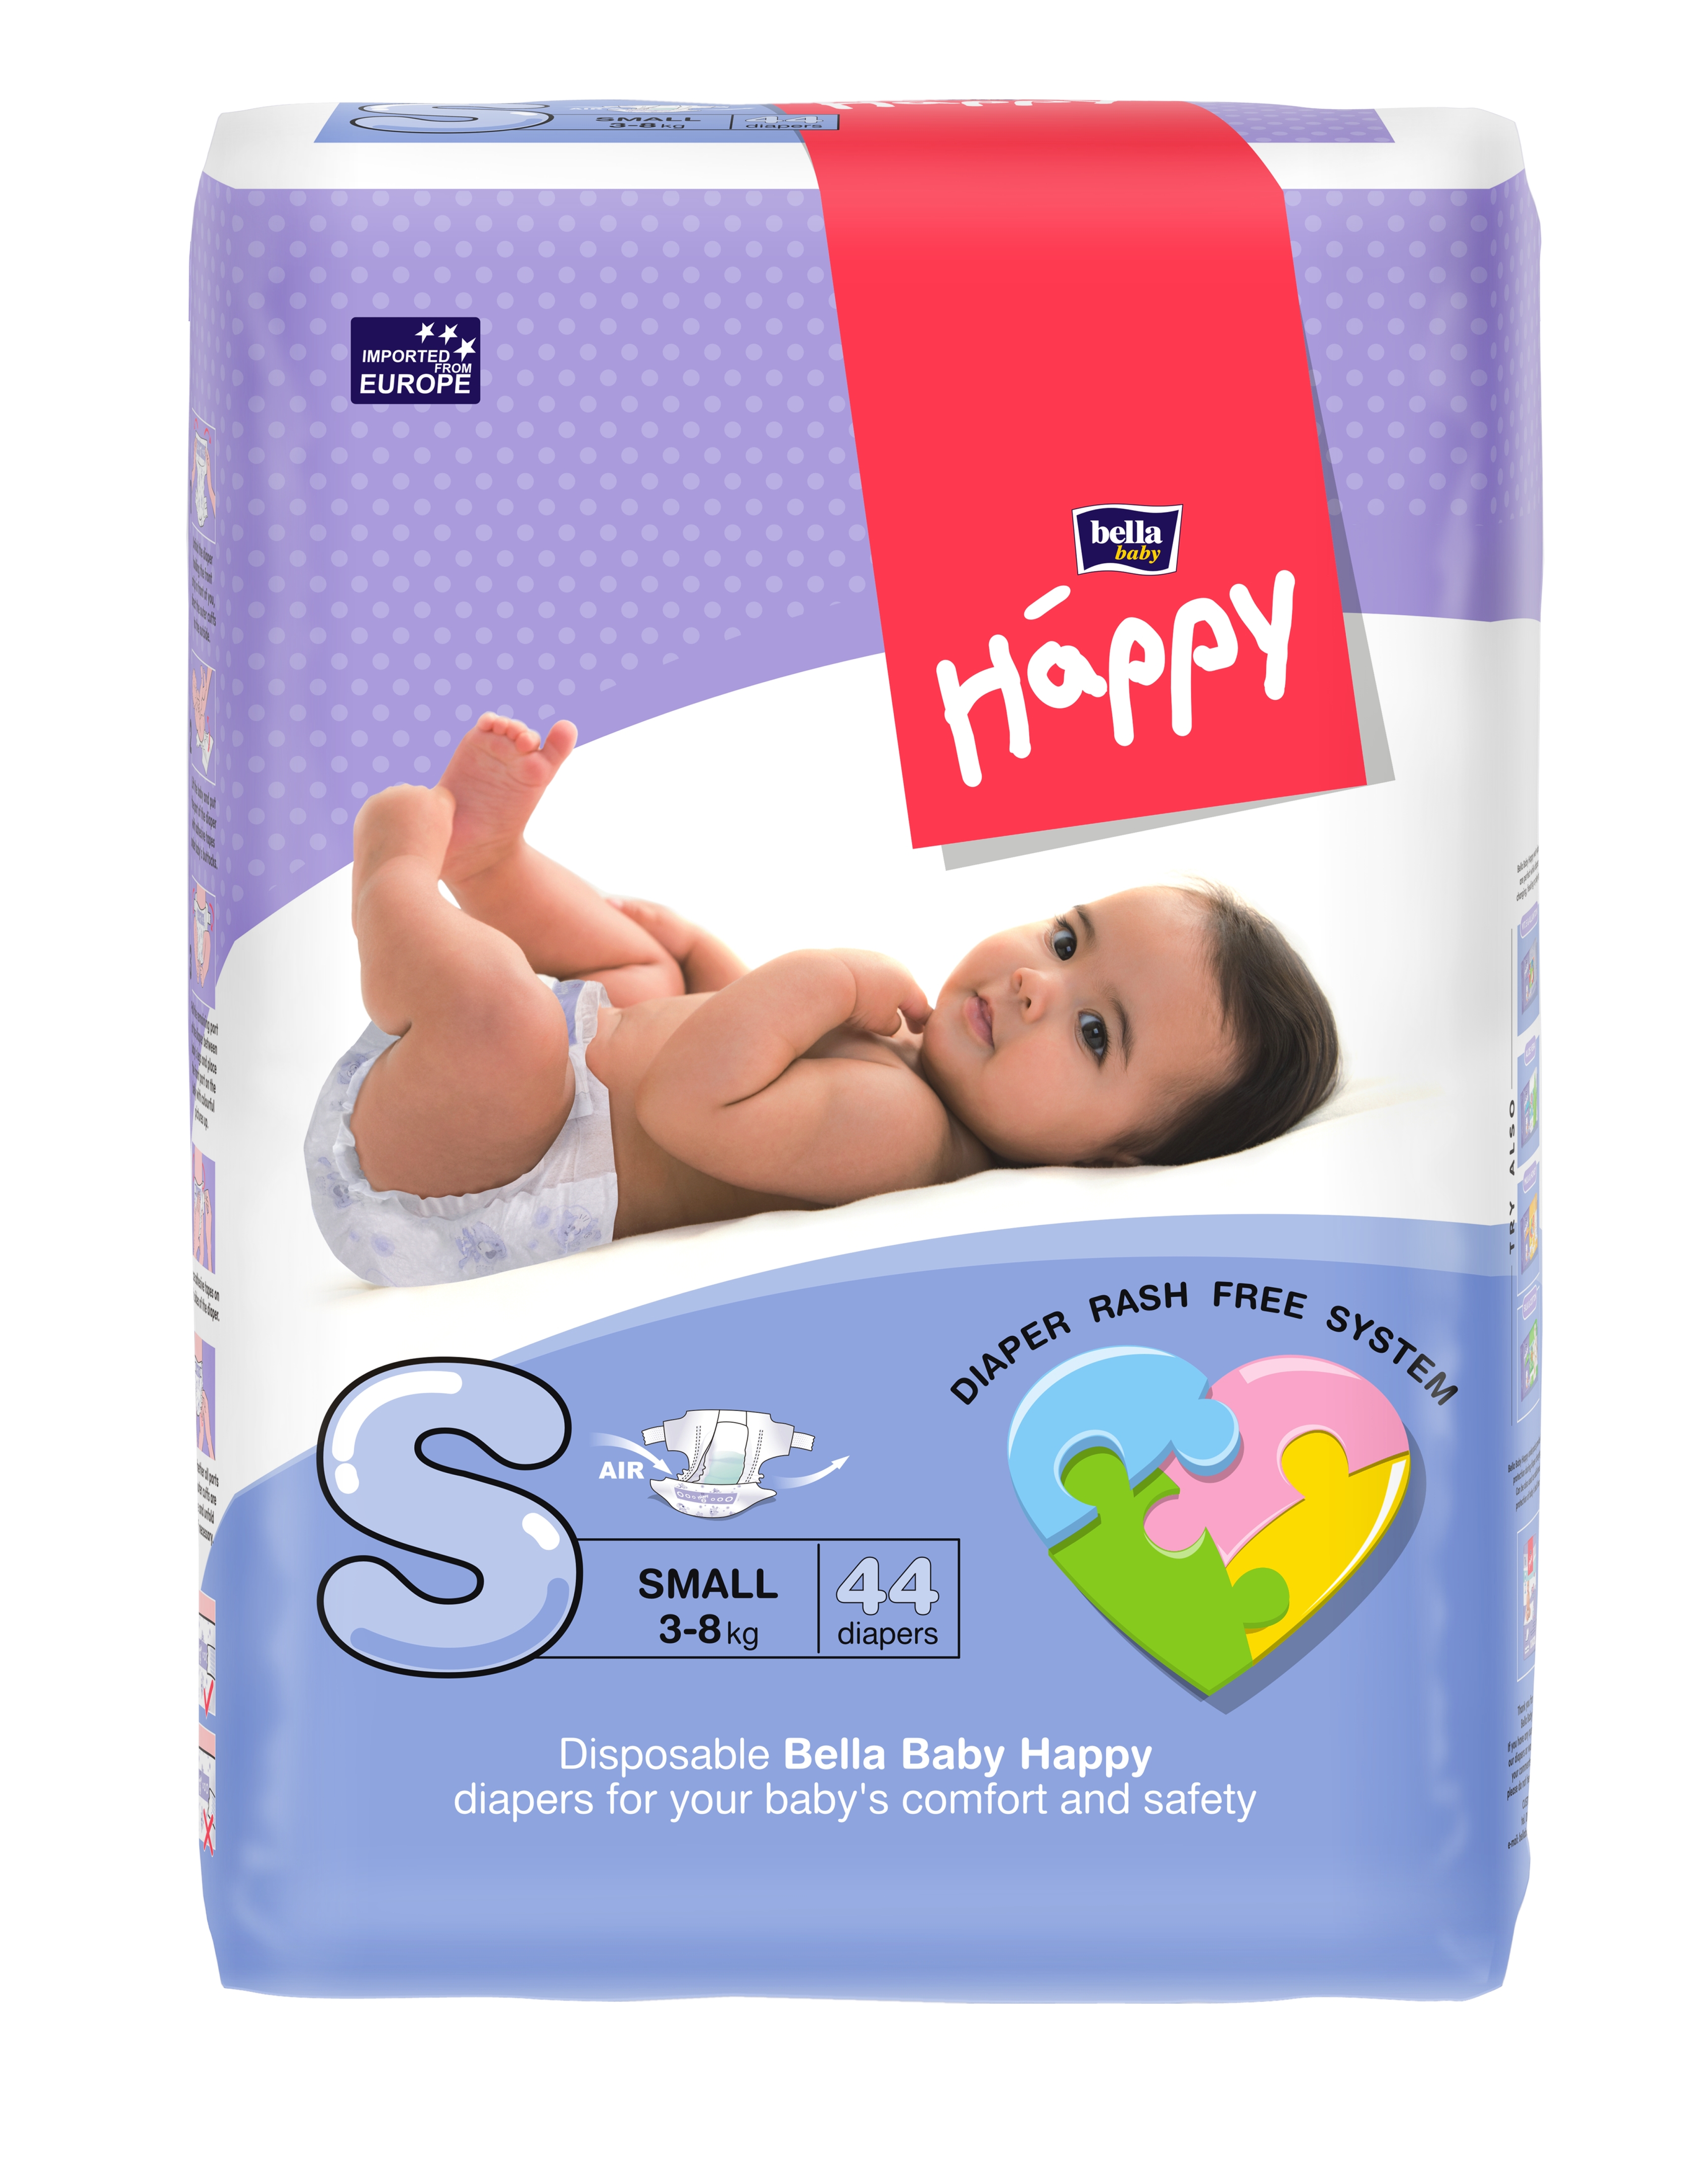 BELLA BABY HAPPY DIAPERS SMALL 44 PCS